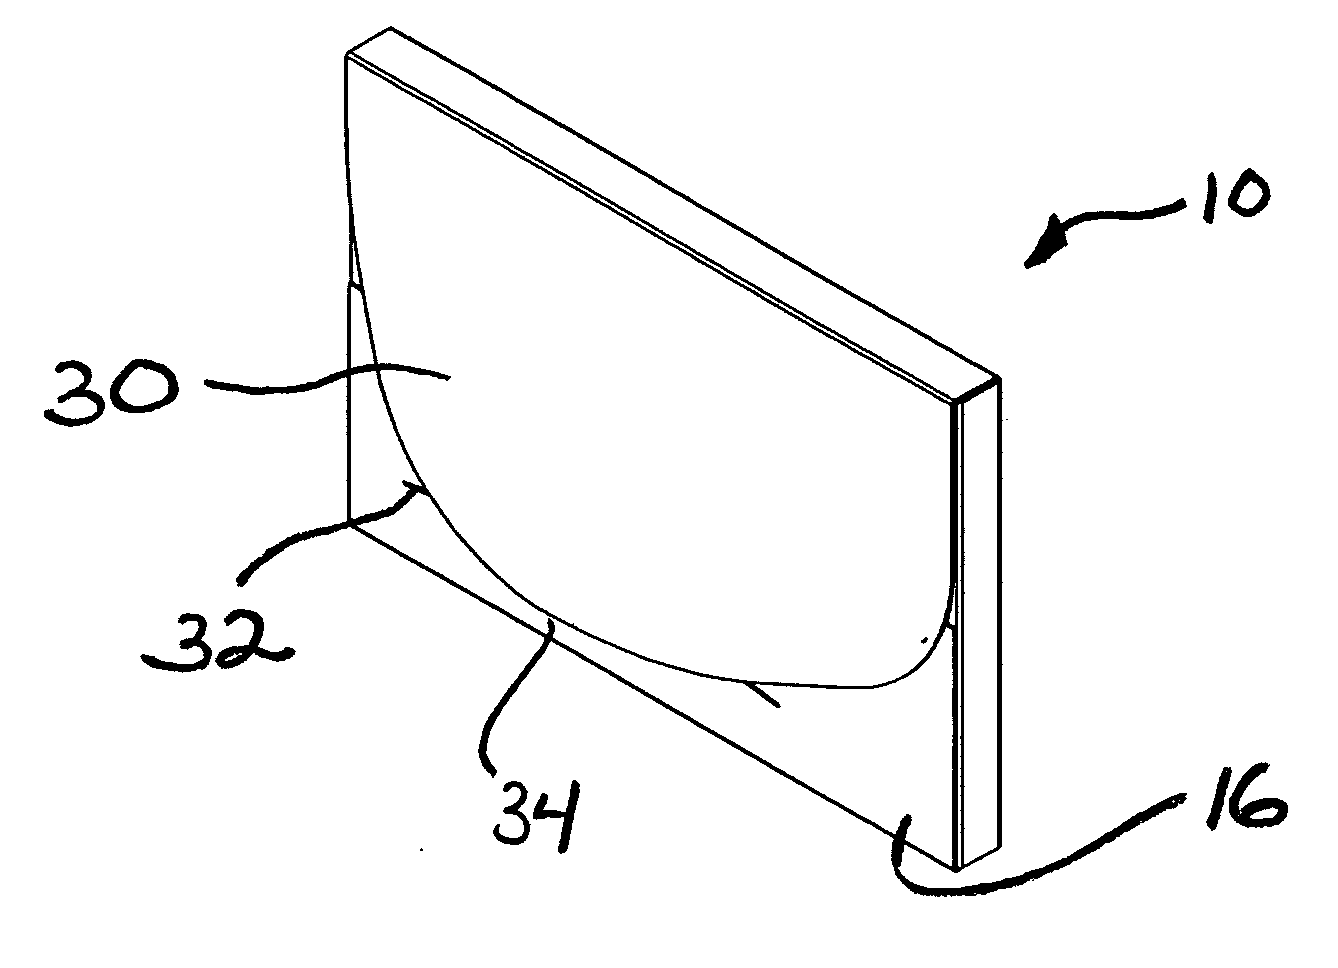 Gum slab package with flap retention